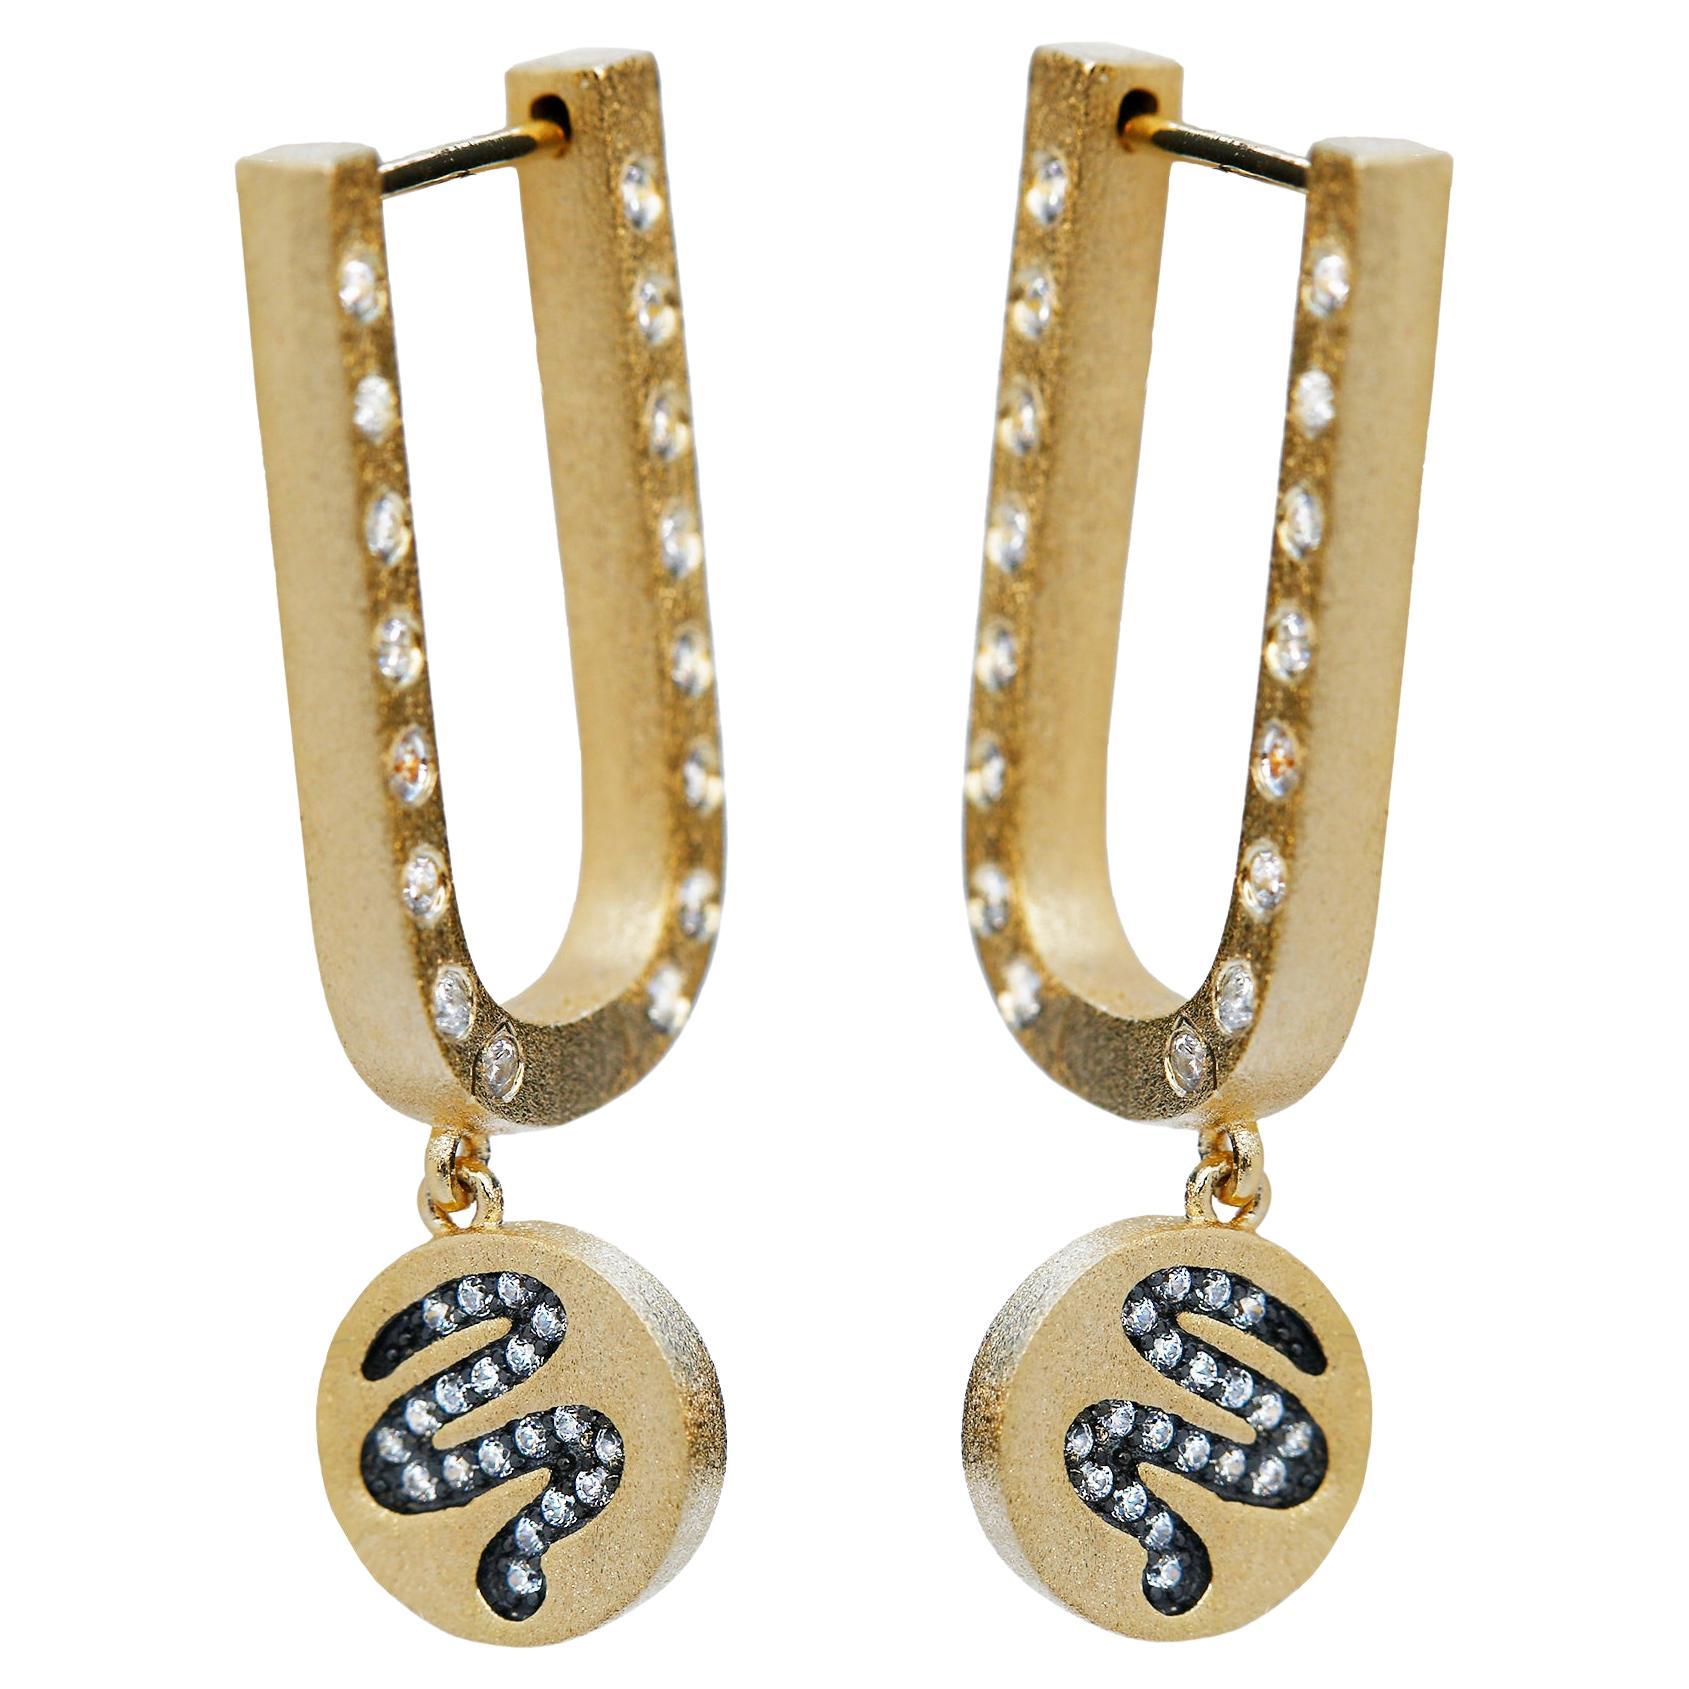  Hoop Earrings by AMMANII with Heliographic Charm in Vermeil Gold